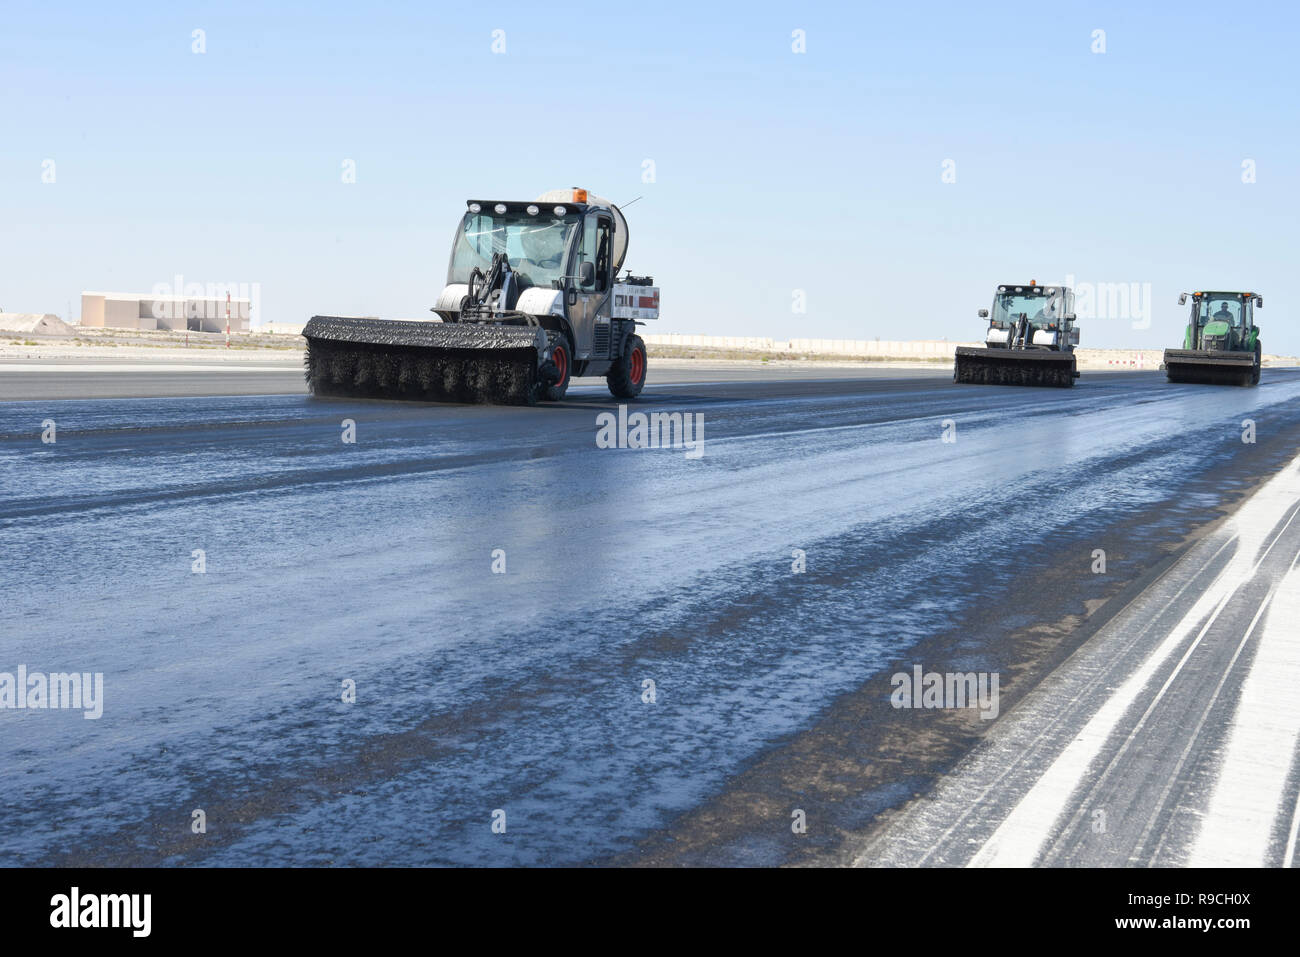 The 577th Expeditionary Prime Beef Squadron agitate Avion on the runway during the rubber removal process at Al Dhafra Air Base, United Arab Emirates, Dec. 15, 2018. Whenever an aircraft touches down on the runway, it leaves a trace of rubber the surface. Over time, excess amounts of rubber reduces aircraft braking, creating a landing hazard. (U.S. Air Force photo by Tech. Sgt. Darnell T. Cannady) Stock Photo